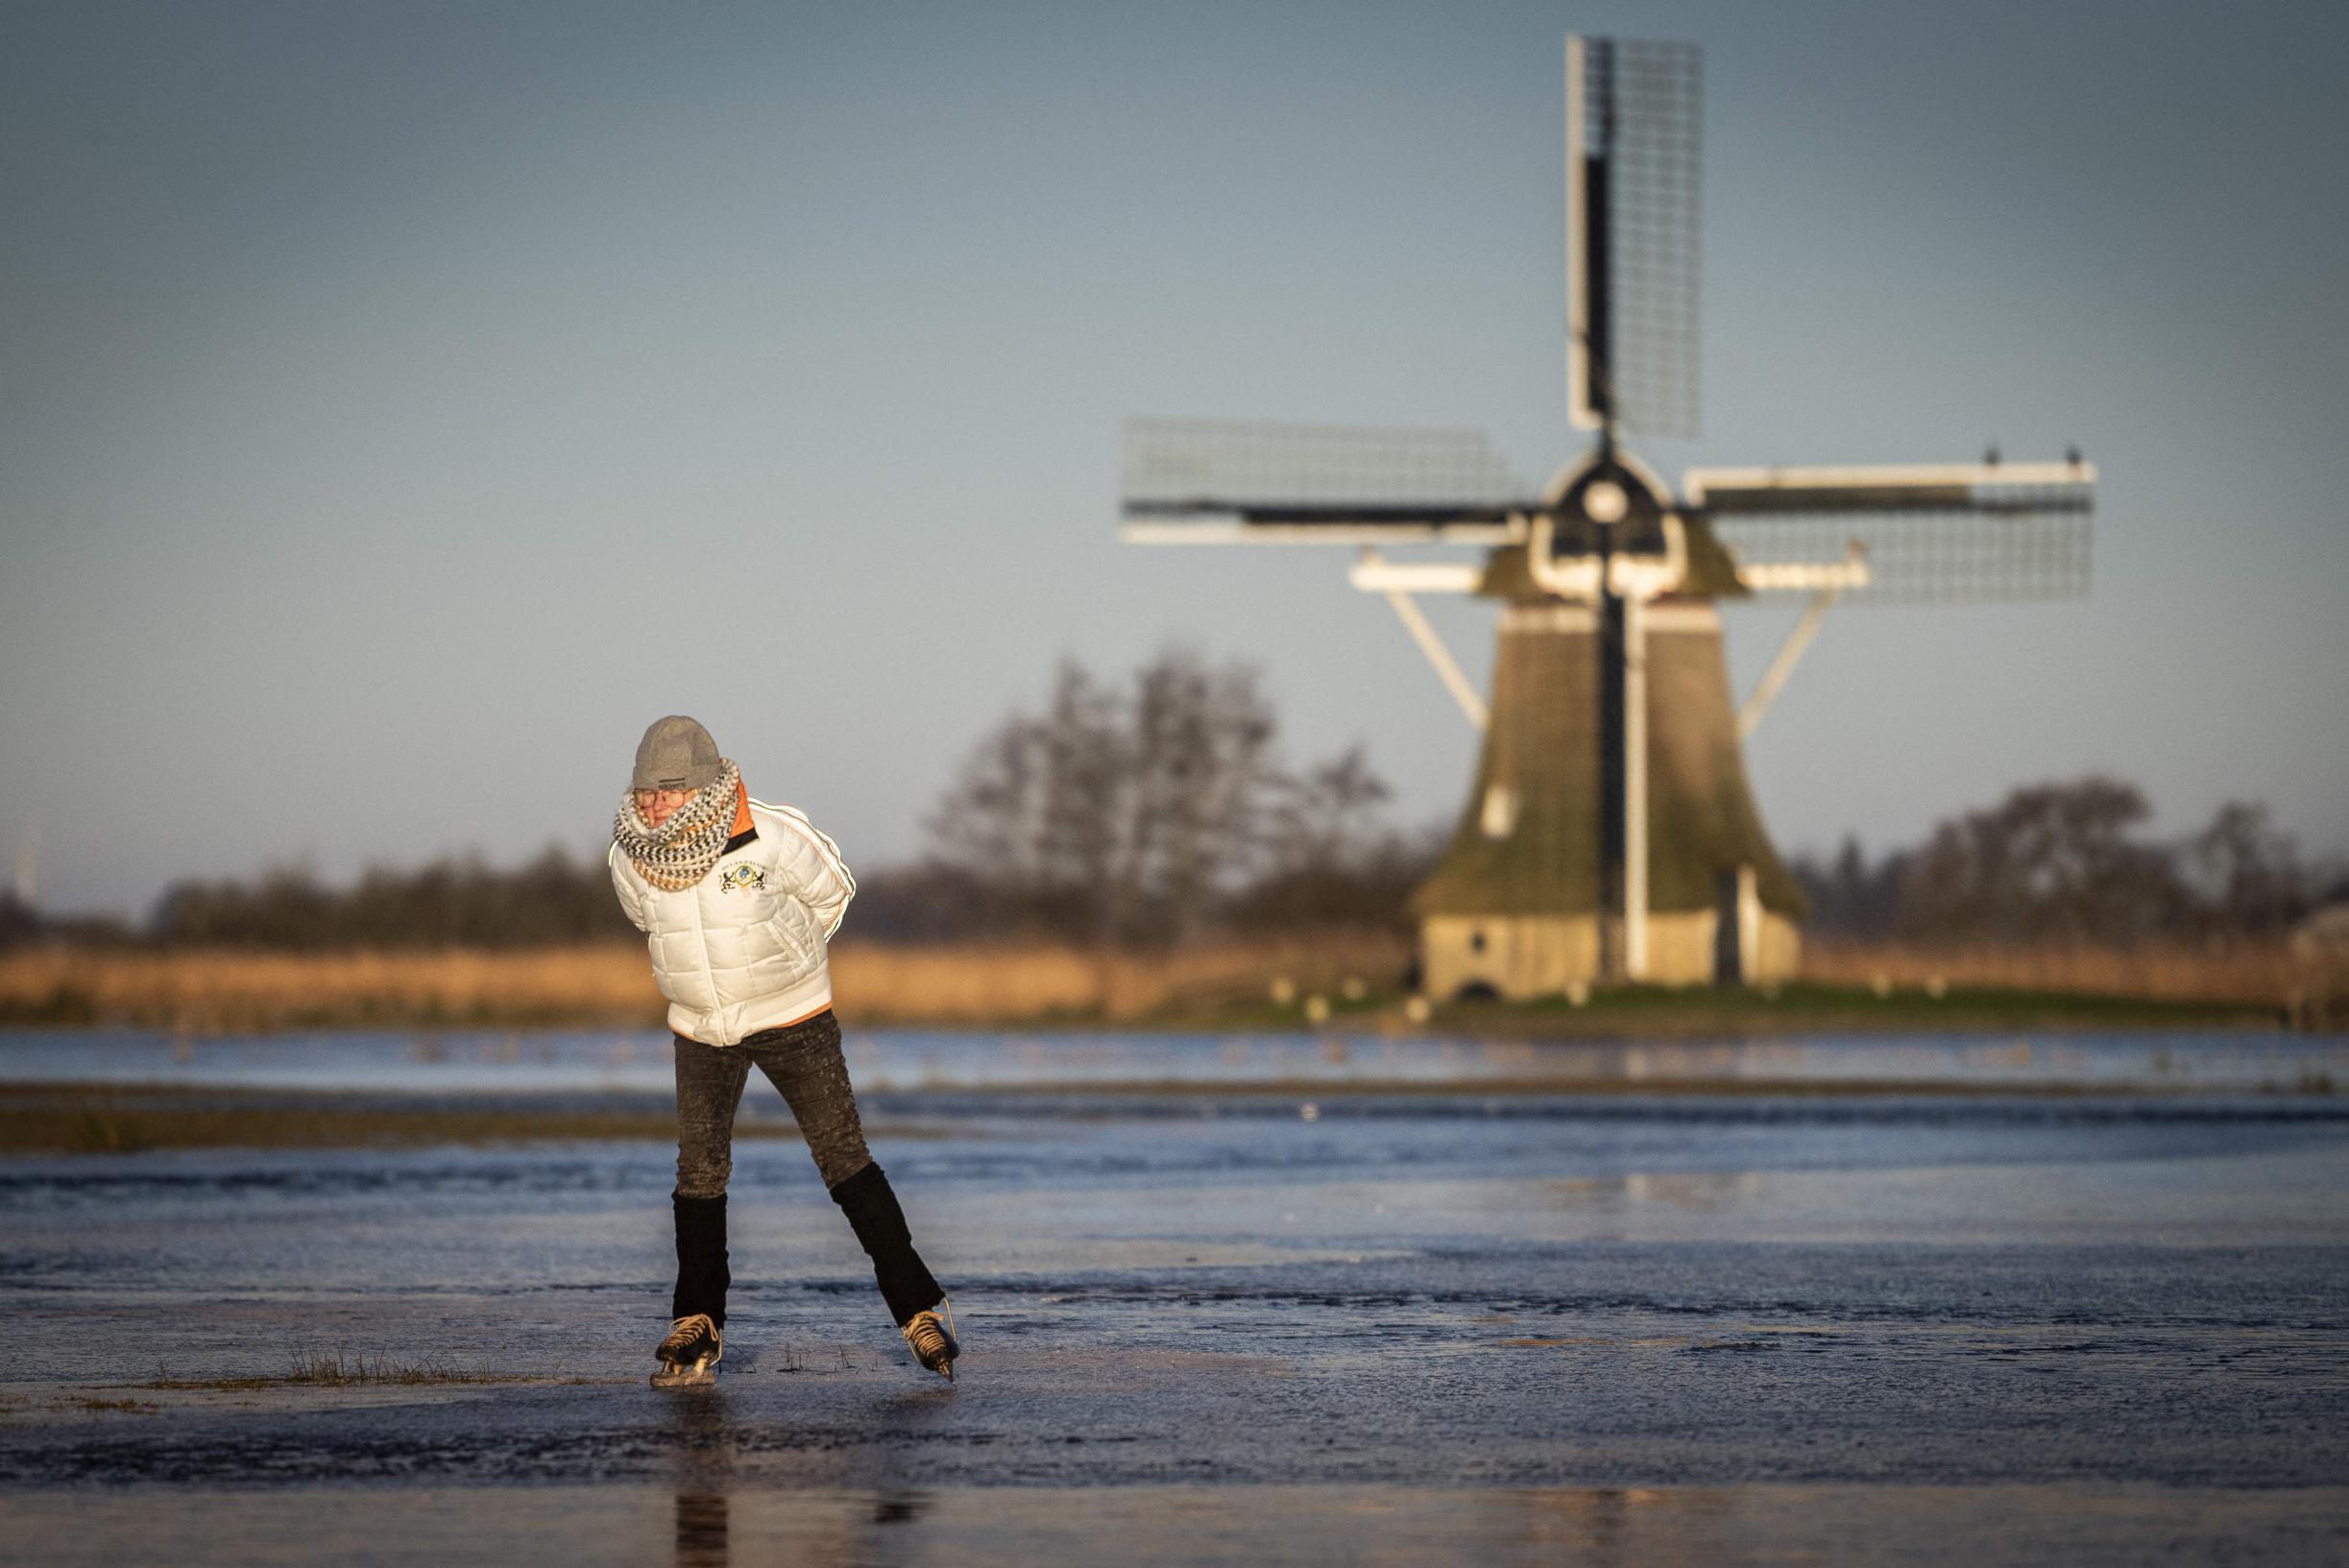 Skating Fun Abounds in the Netherlands Amid Freezing Cold